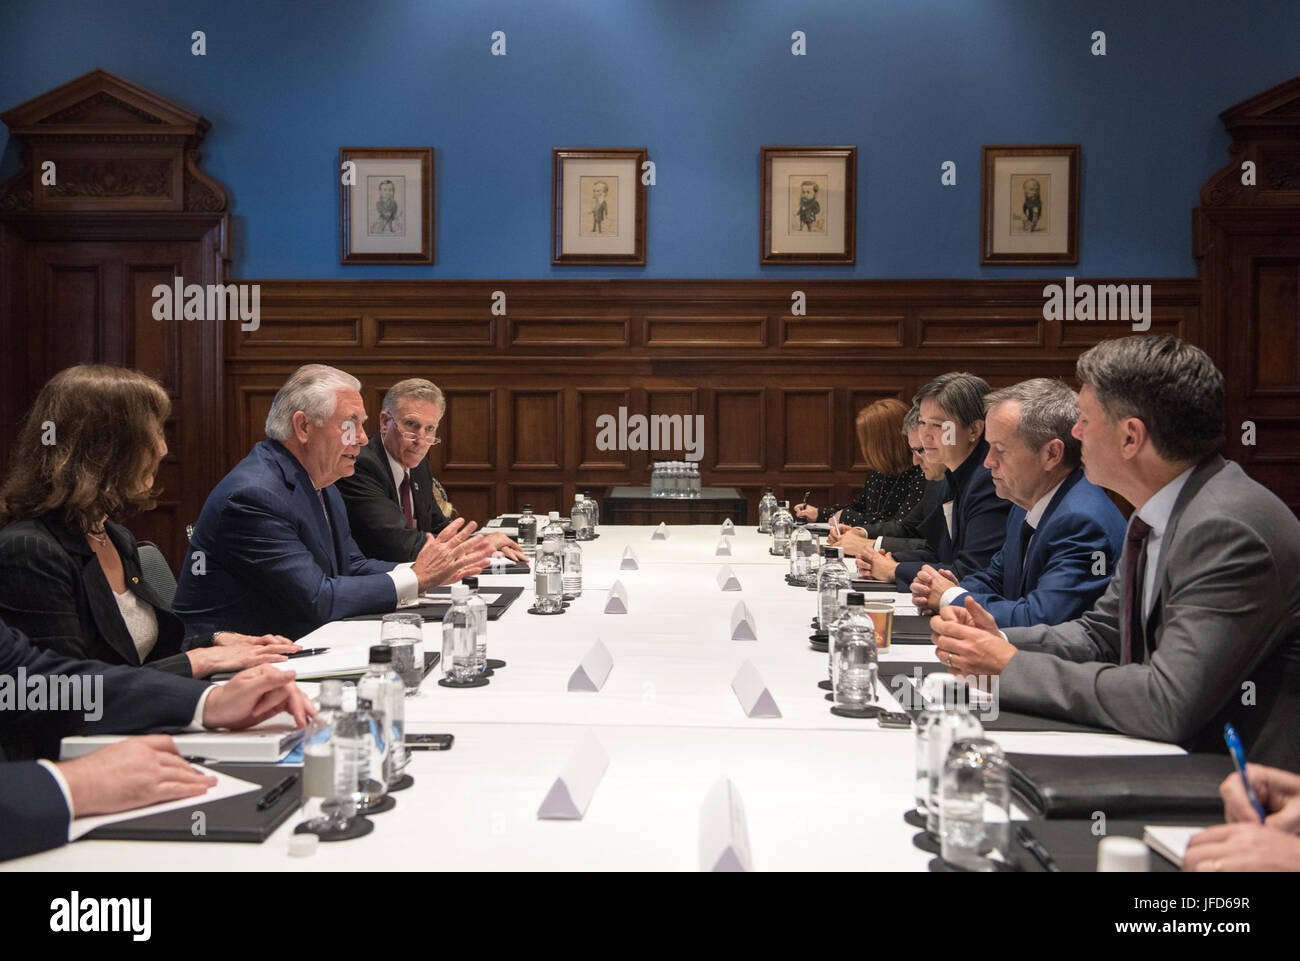 U.S. Secretary of State Rex Tillerson and U.S. Charge d'Affaires James Carouso meet with Australian Leader of the Opposition Bill Shorten and Cabinet members during the 2017 Australia Ministerial Consultations (AUSMIN) in Sydney, Australia, on June 5, 2017. [/ ] Stock Photo